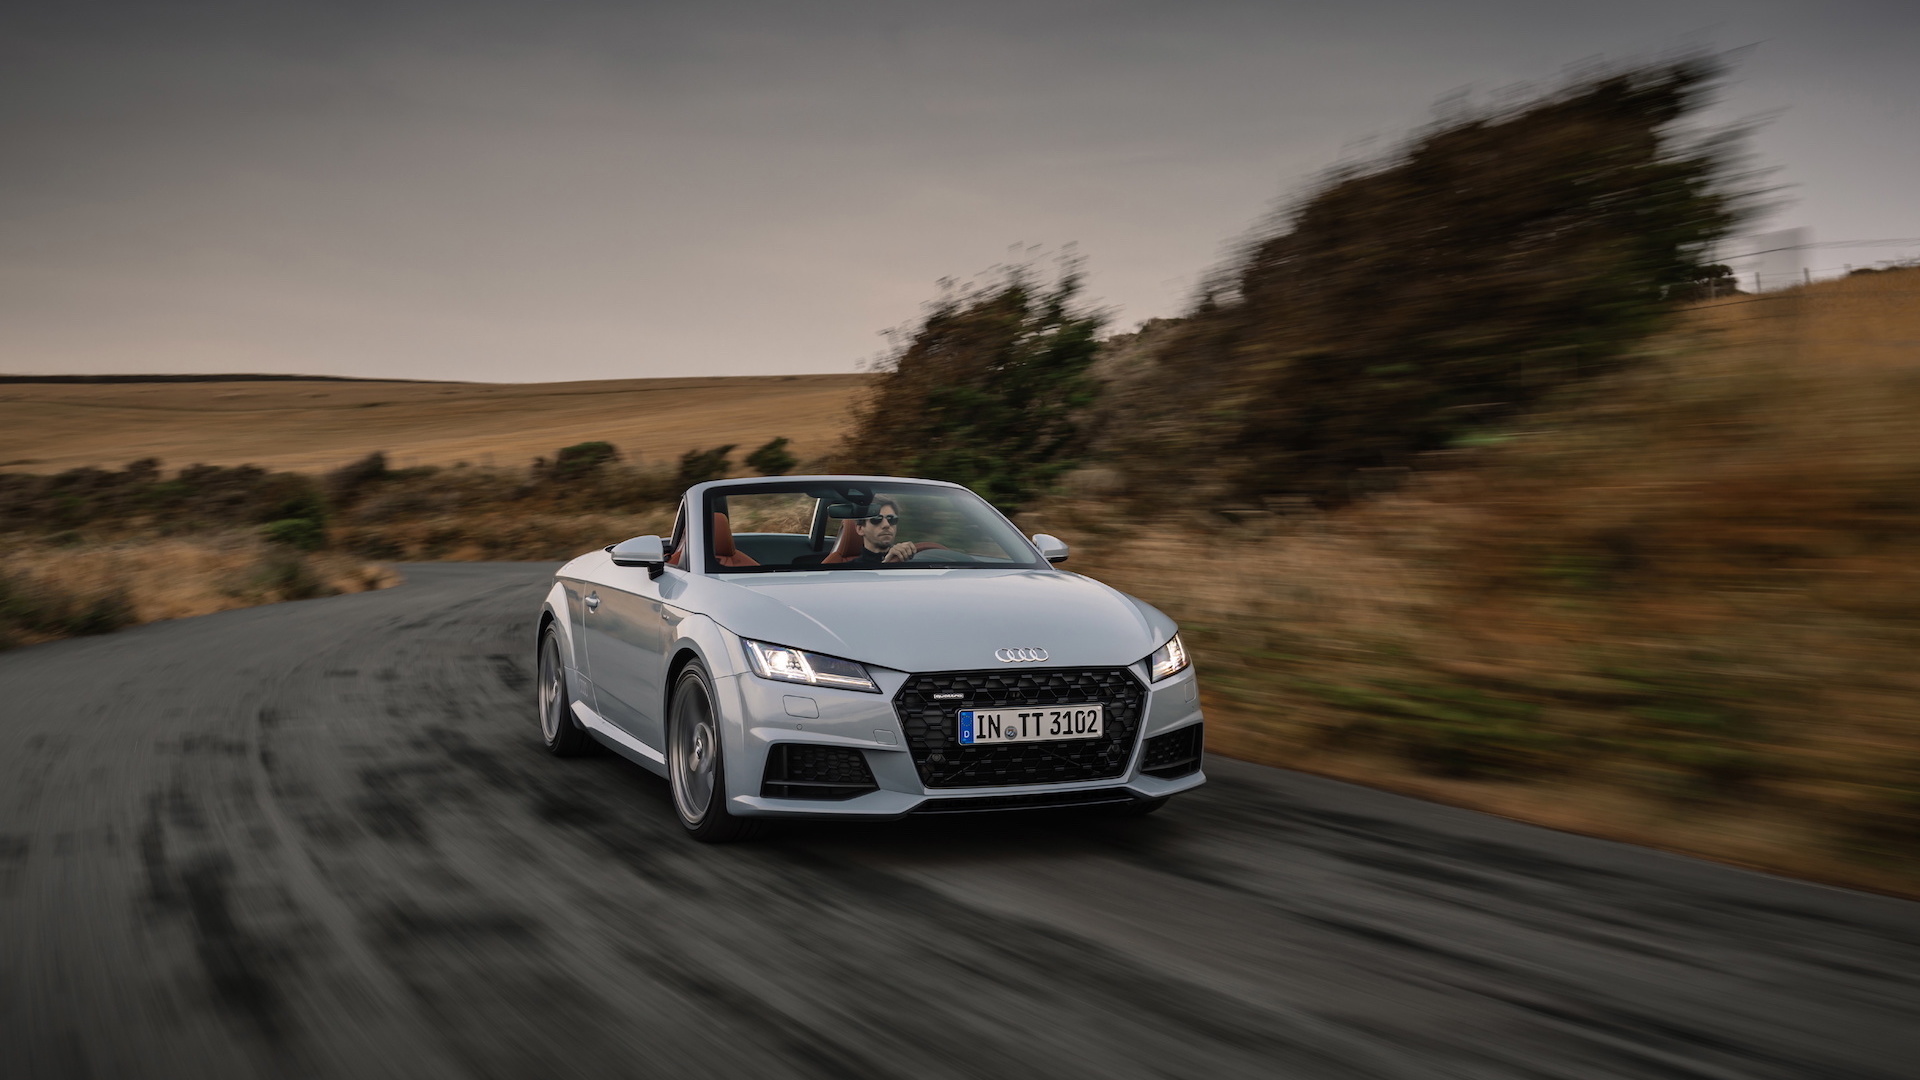 2019 Audi TT 20 Years special edition